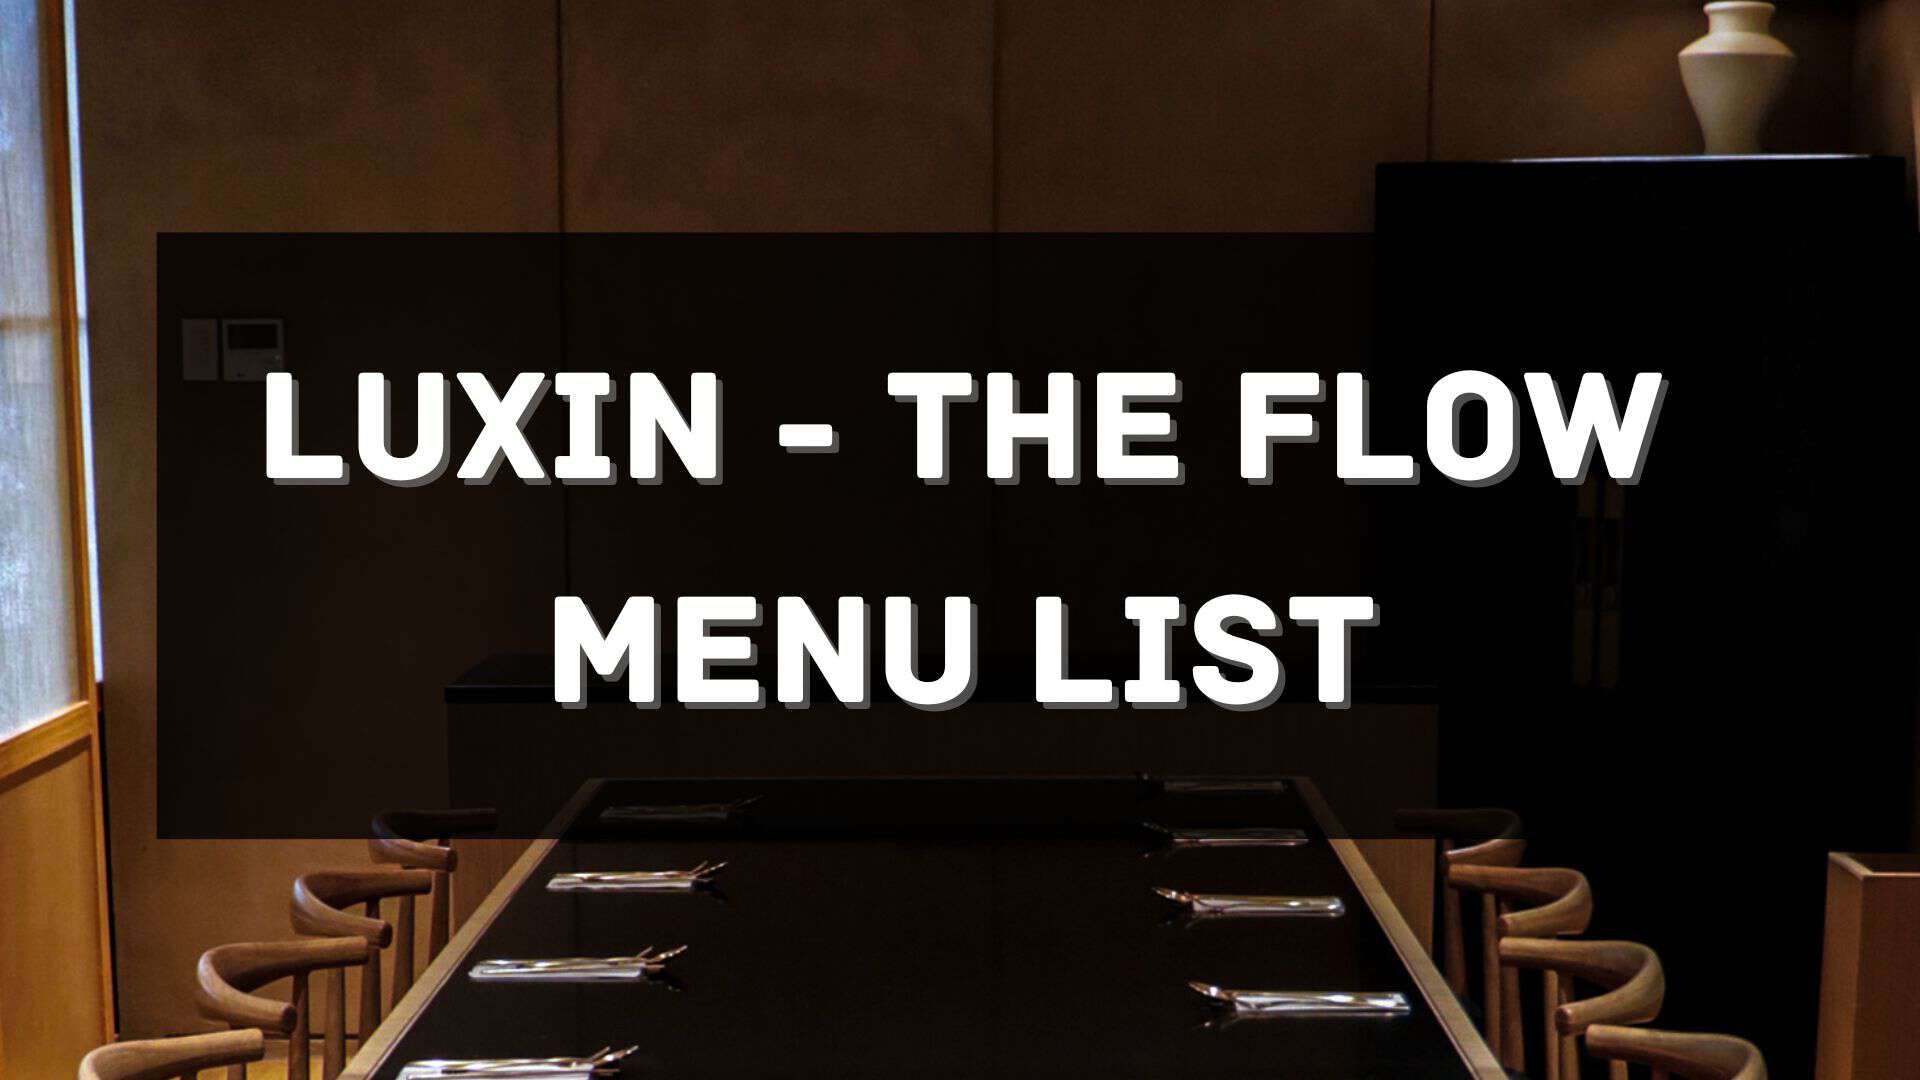 luxin - the flow menu prices philippines